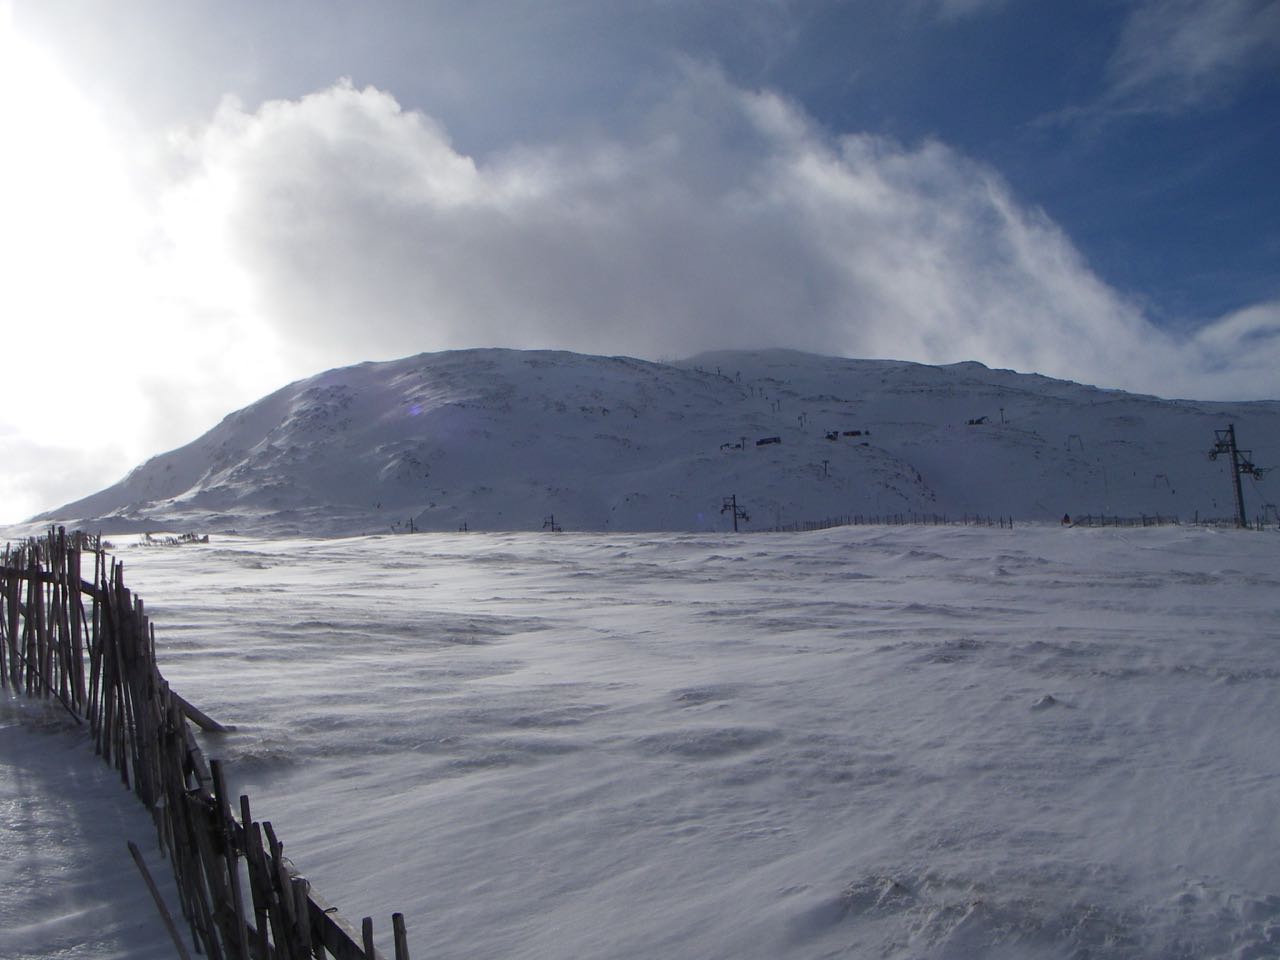 The sun out on Meall a Bhuiridh by mid-day.